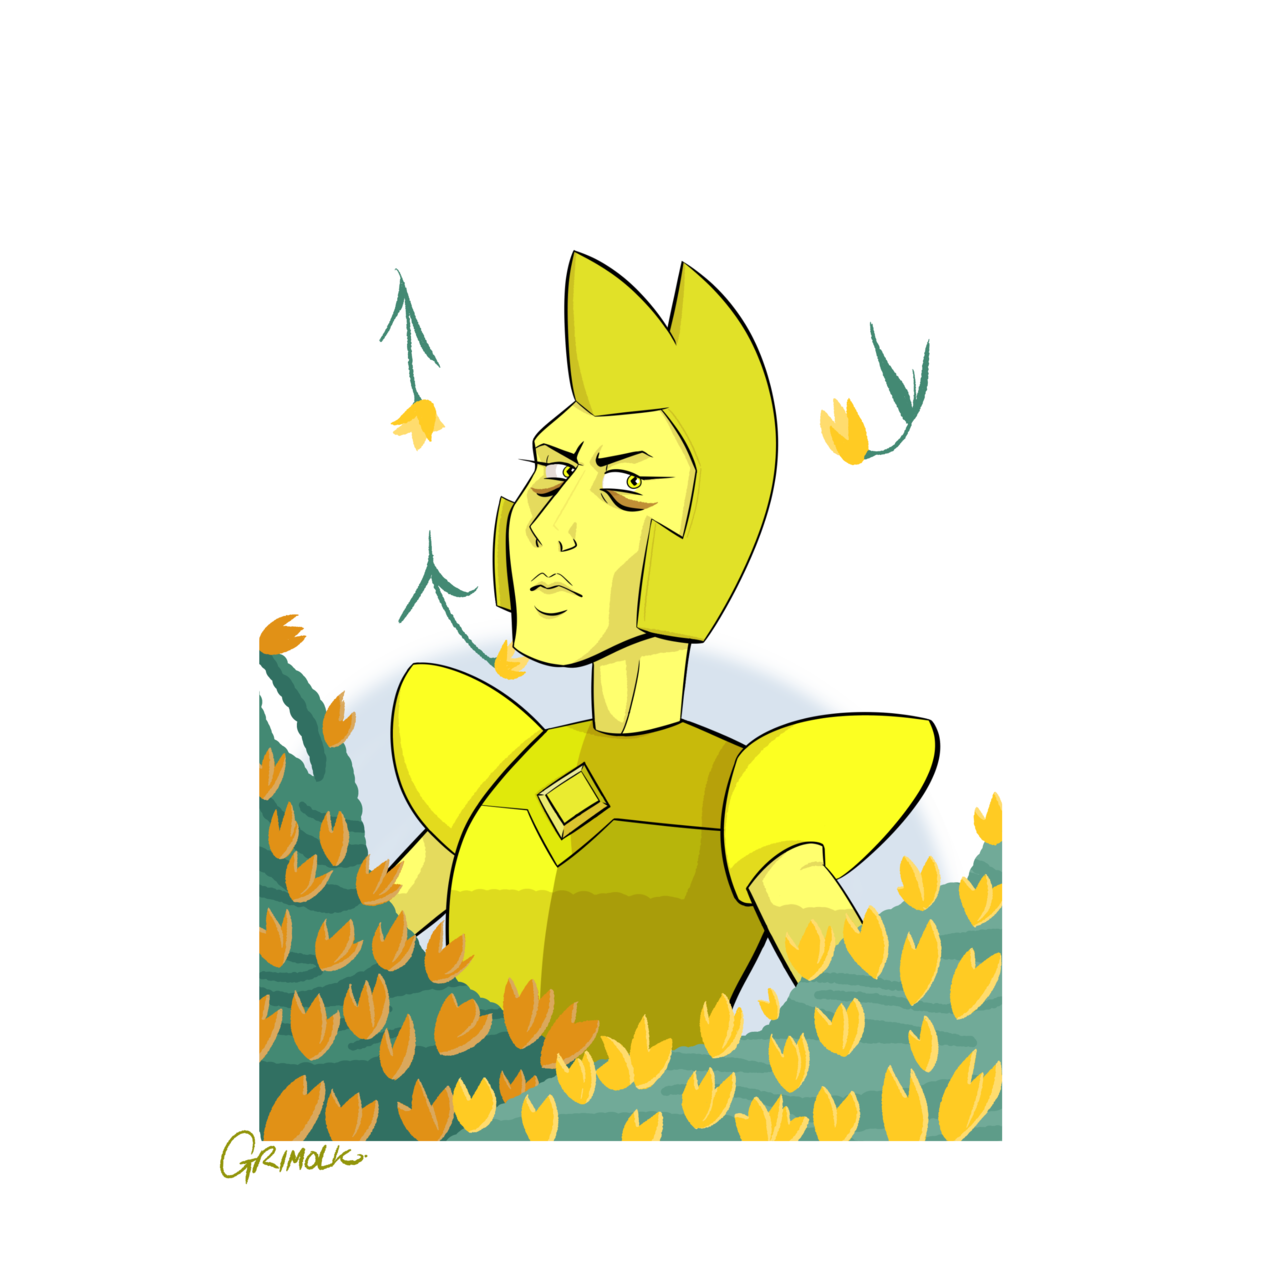 The Diamond Authority & Flowers - I thought I might as well post these drawings here too after that heckin episode just aired! Hope you like them because they were super fun to draw!